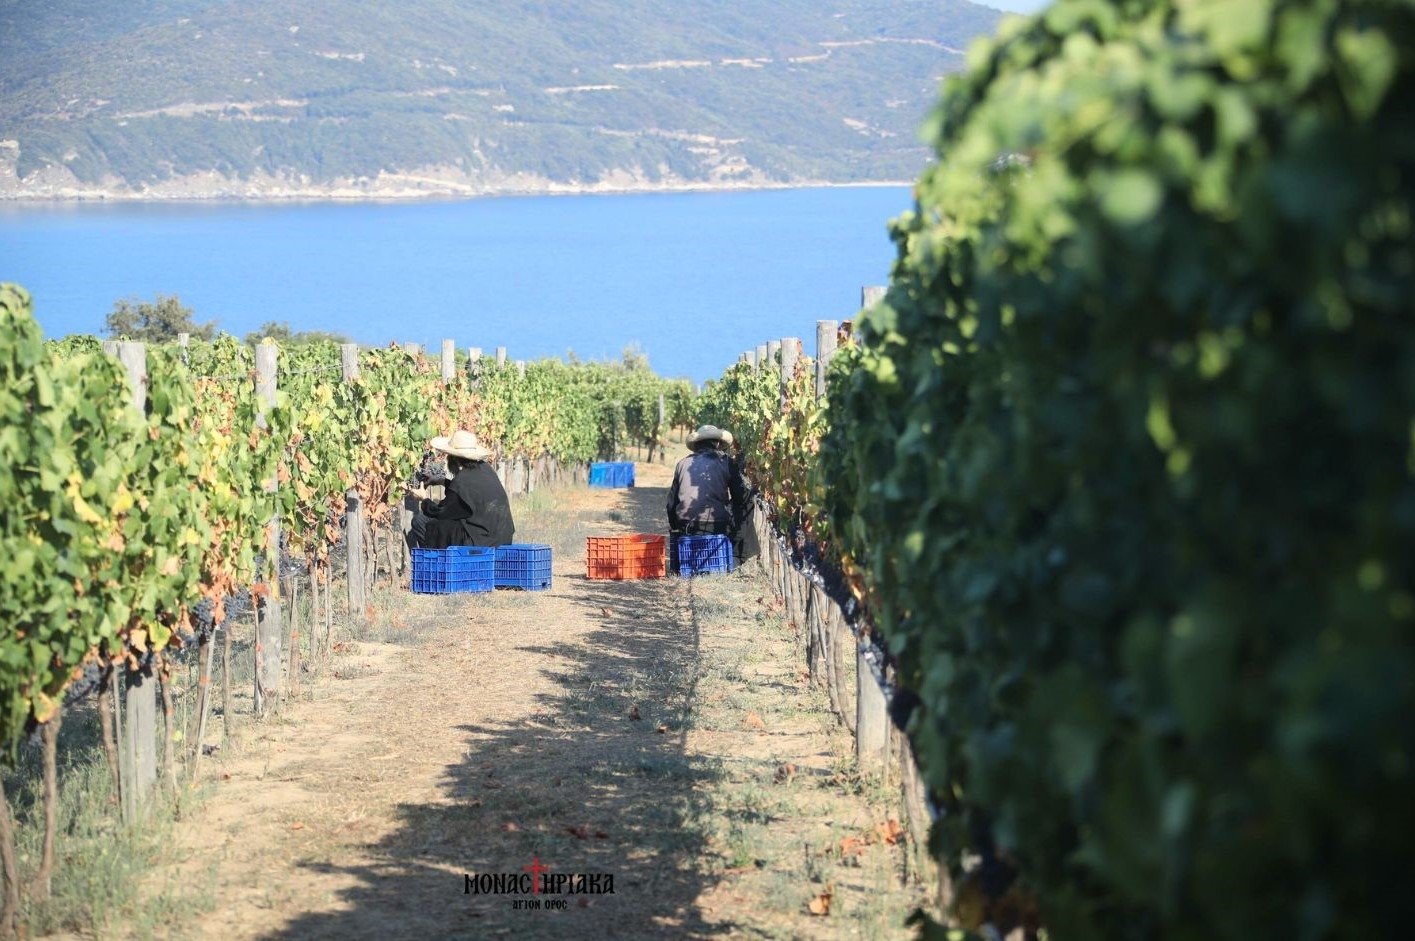 Monks cultivate the vines on Mount Athos